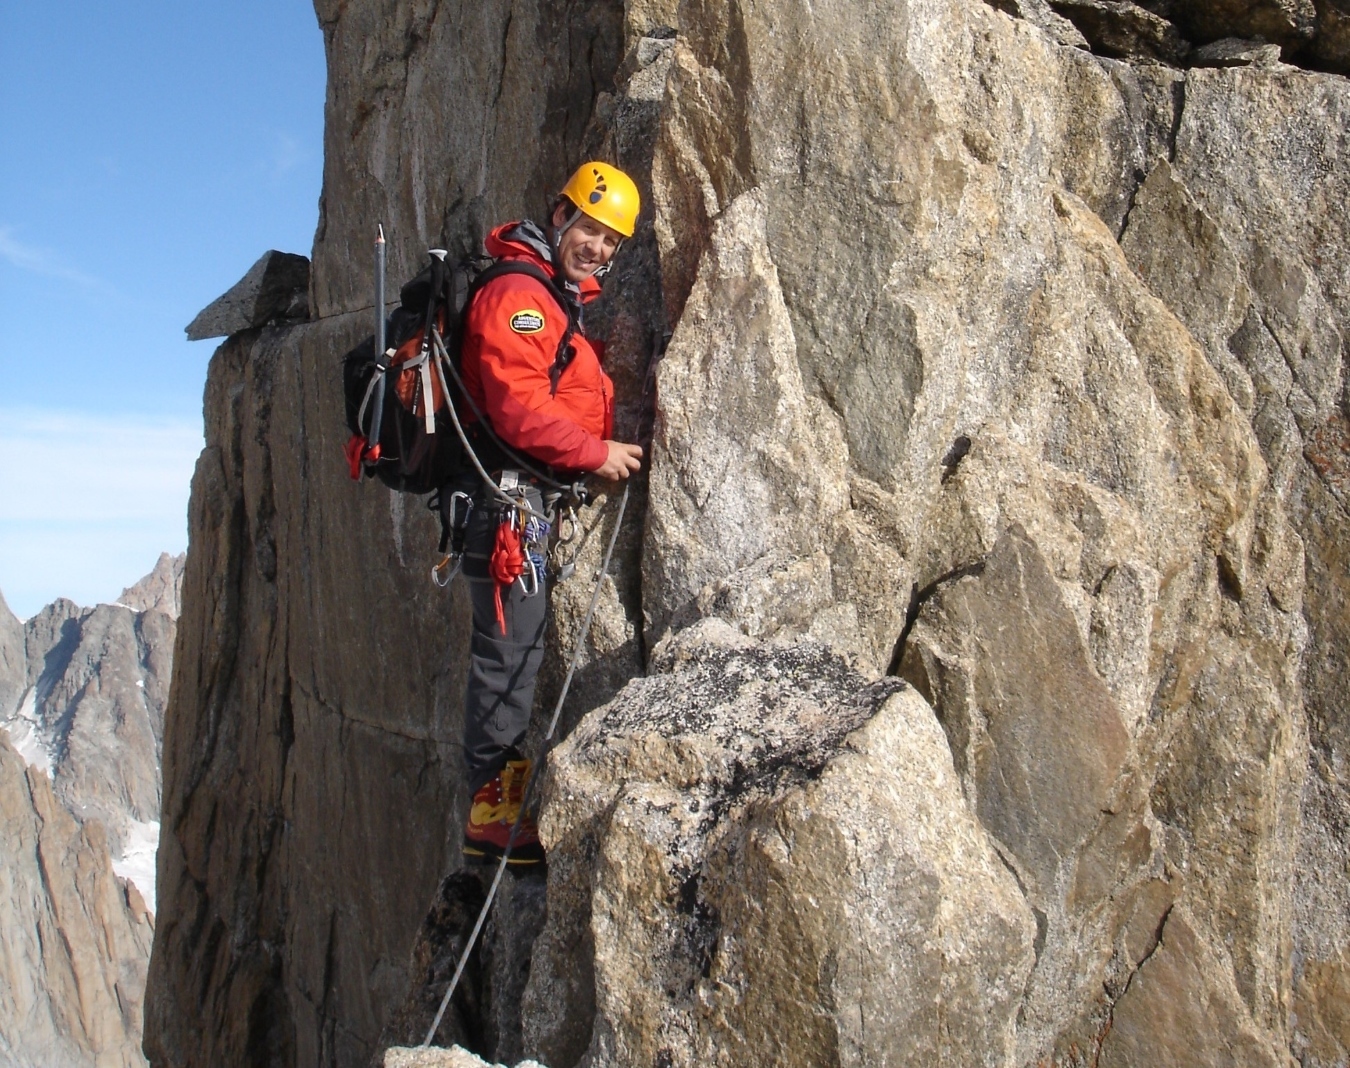 Climbing Route d'Entreves in the European Alps